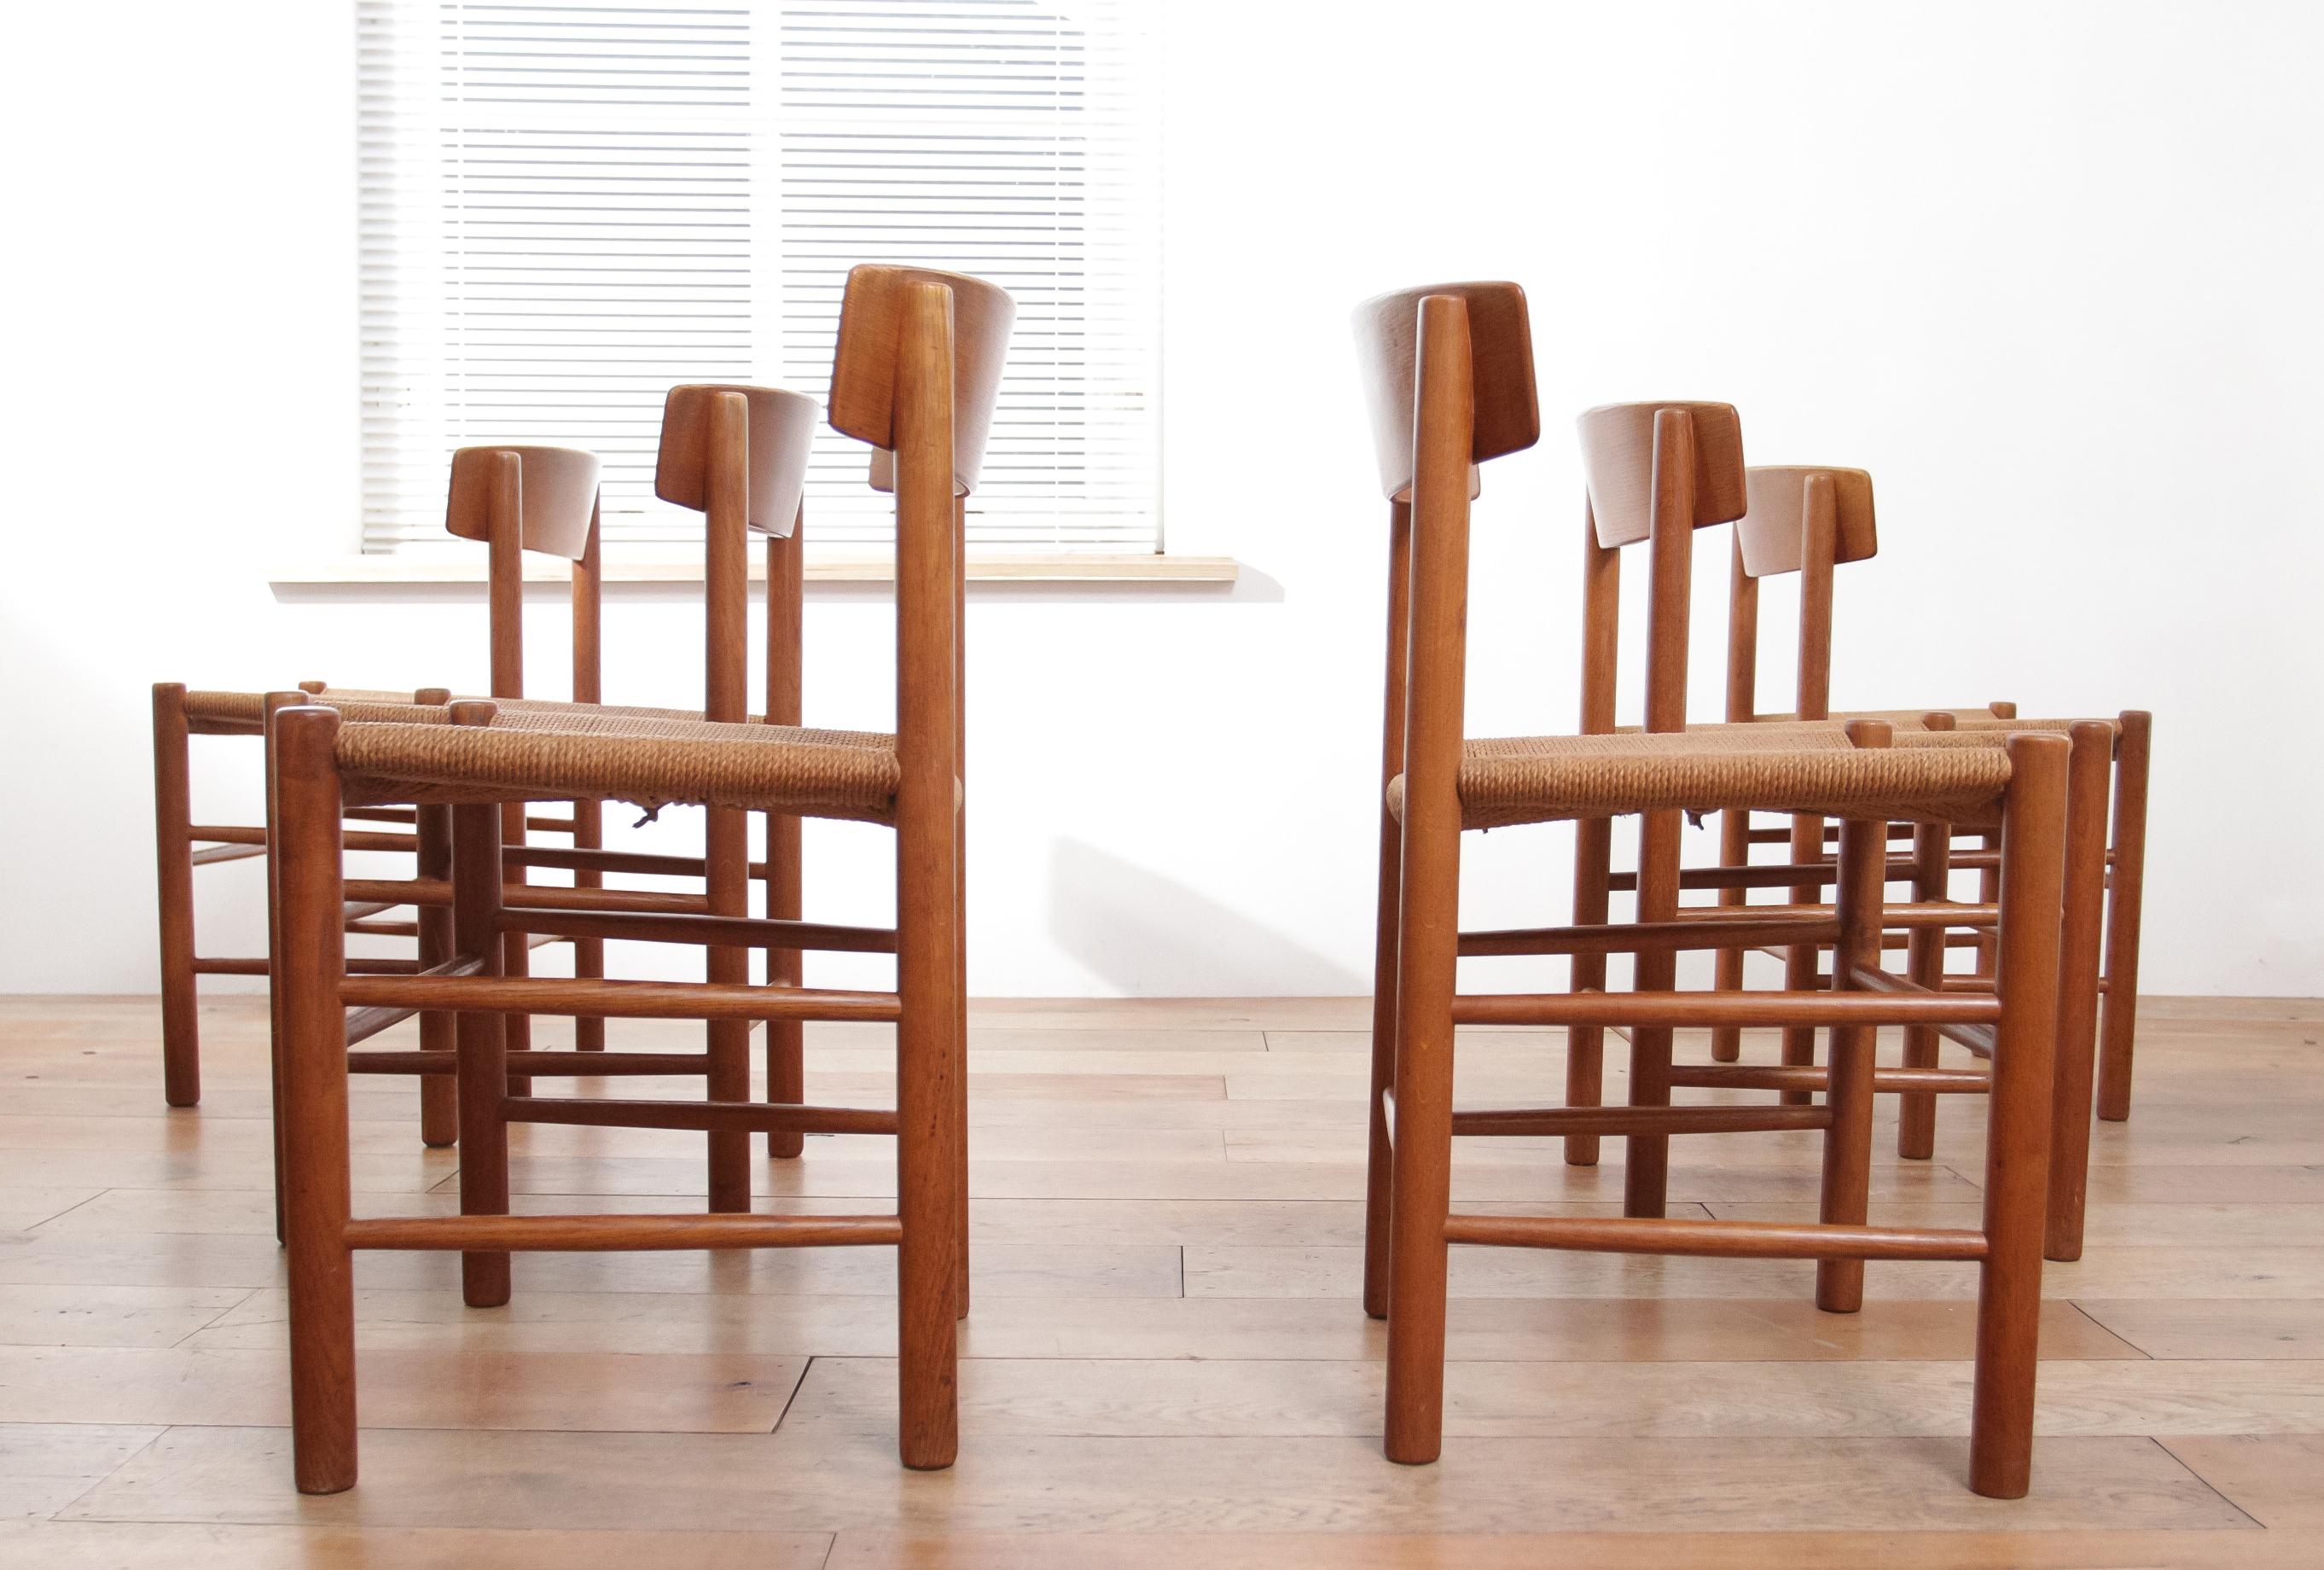 The chairs shown are a quintessential example of Scandinavian design, likely the J39 dining chairs designed by Danish furniture maker Børge Mogensen around 1960. Characterized by their simple yet elegant form, the chairs are crafted from sturdy